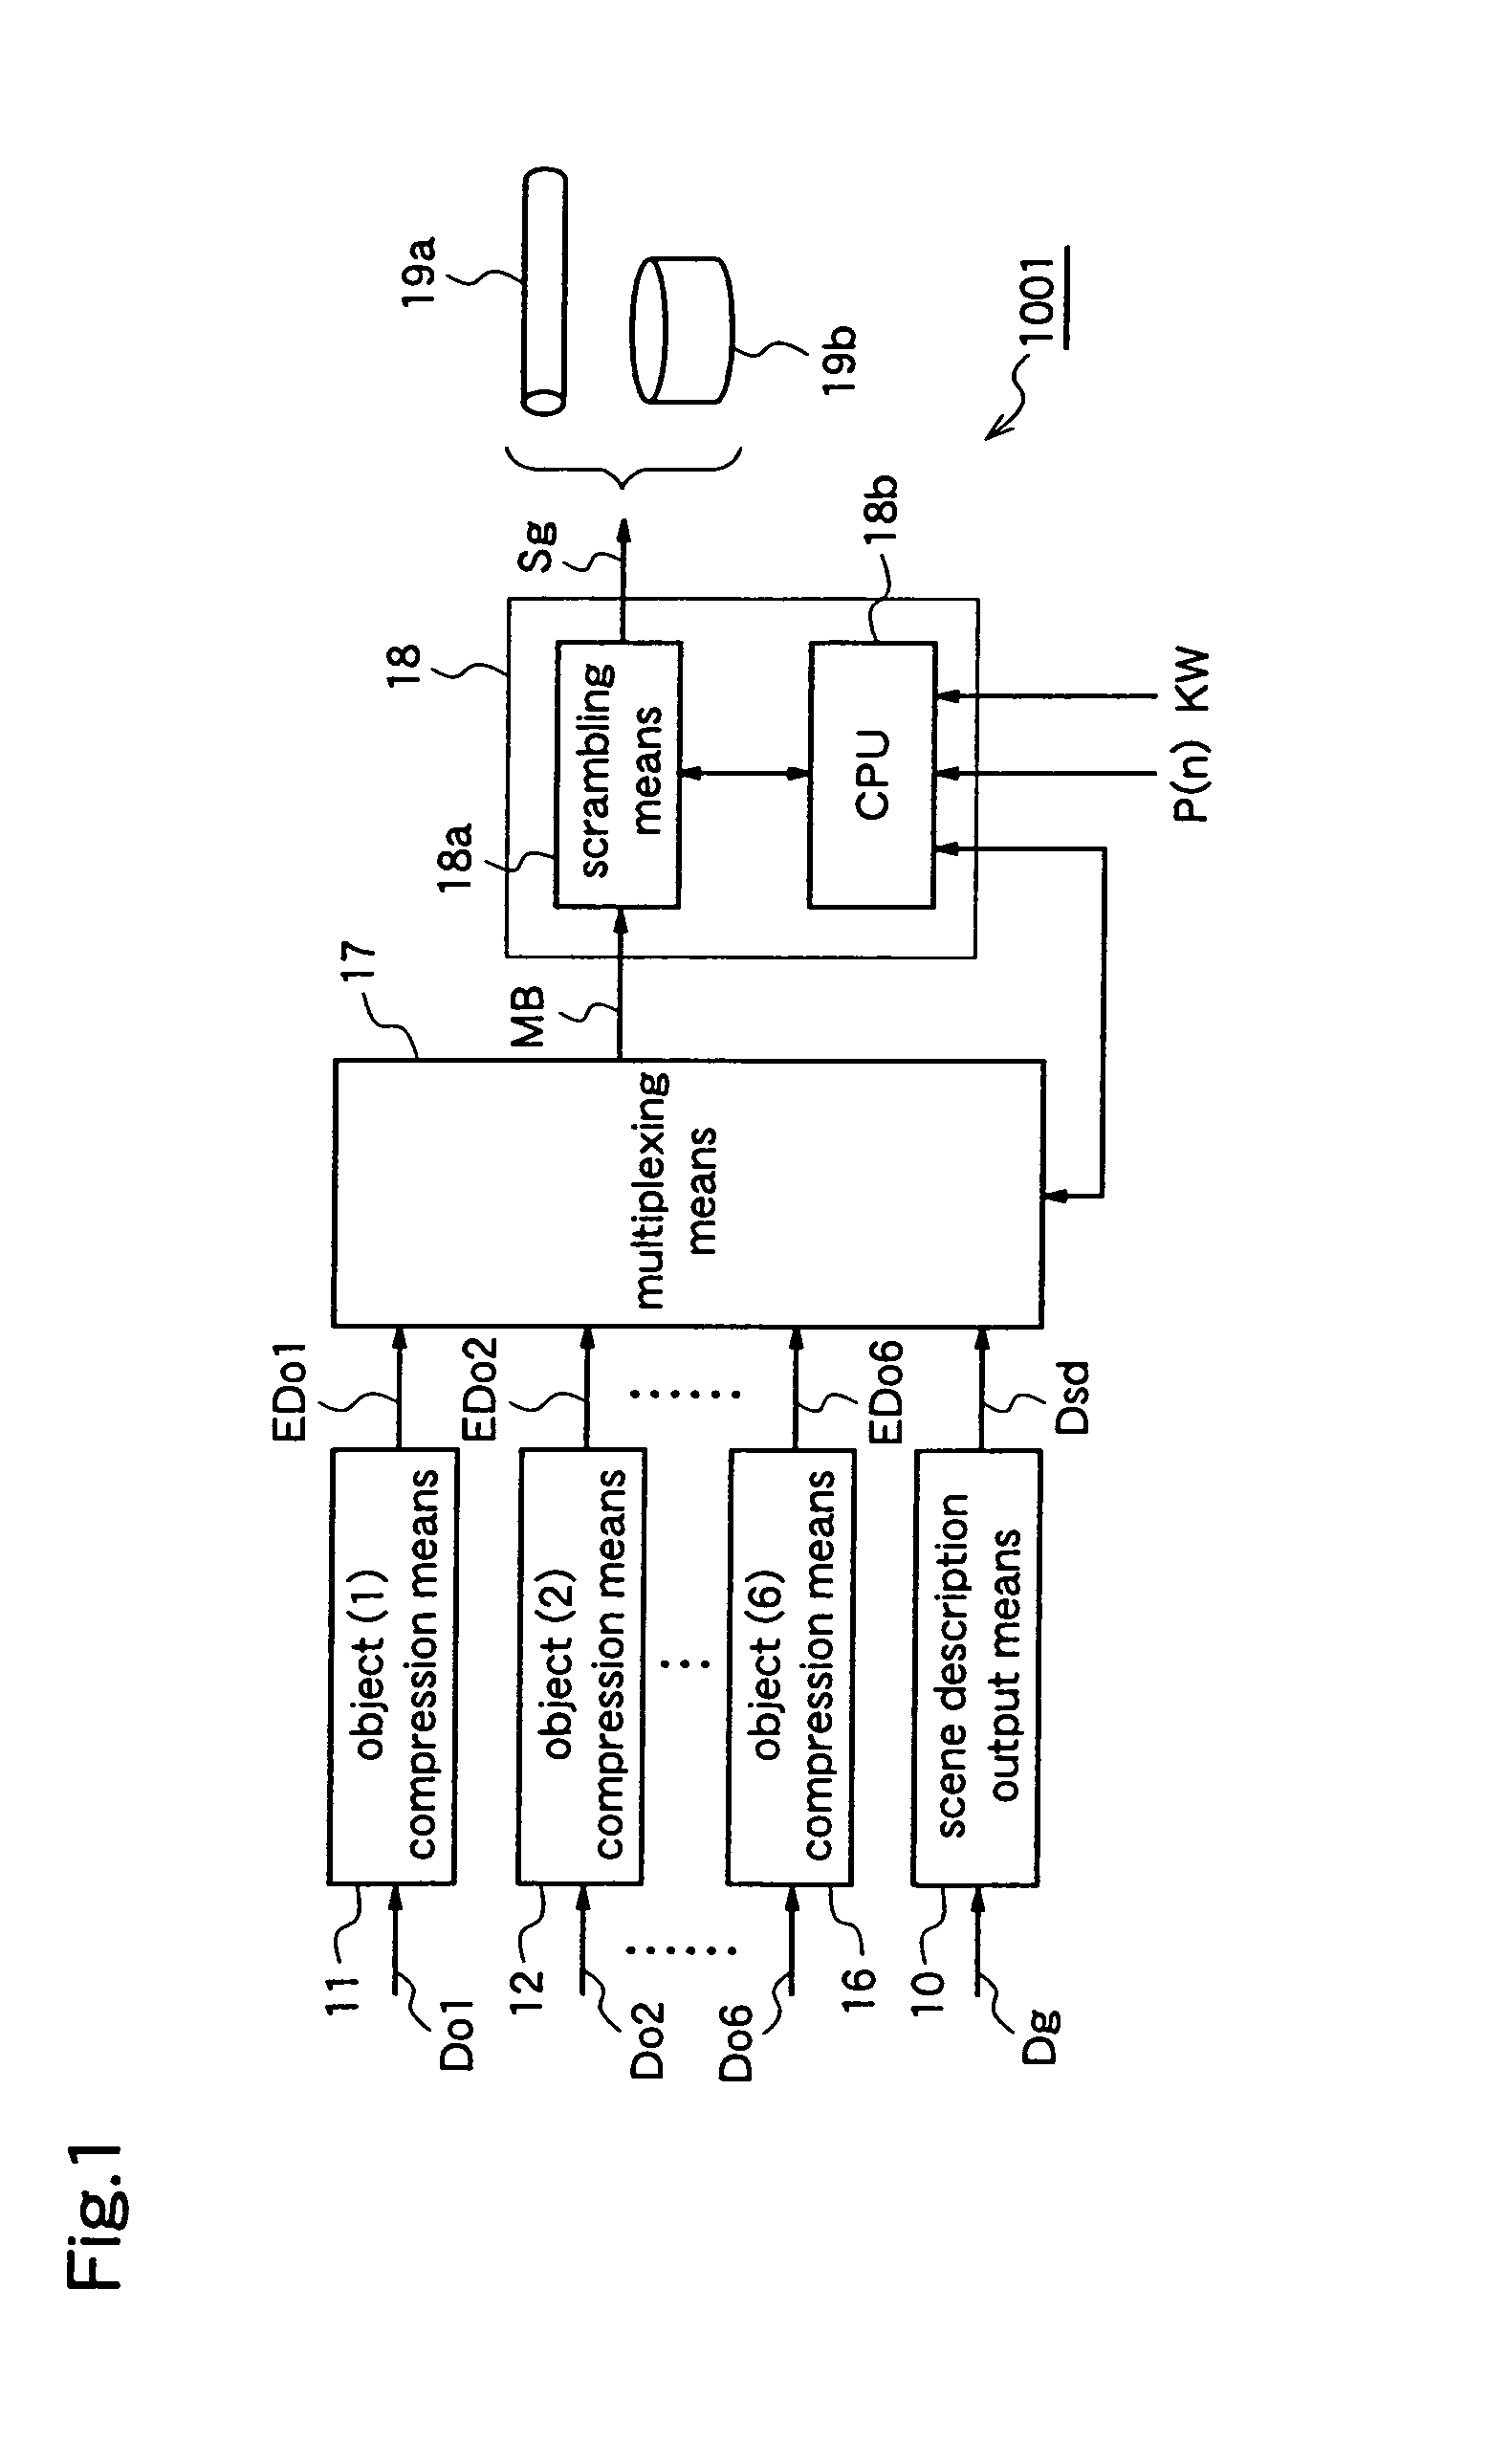 Image object recording, compression, and encryption method and system